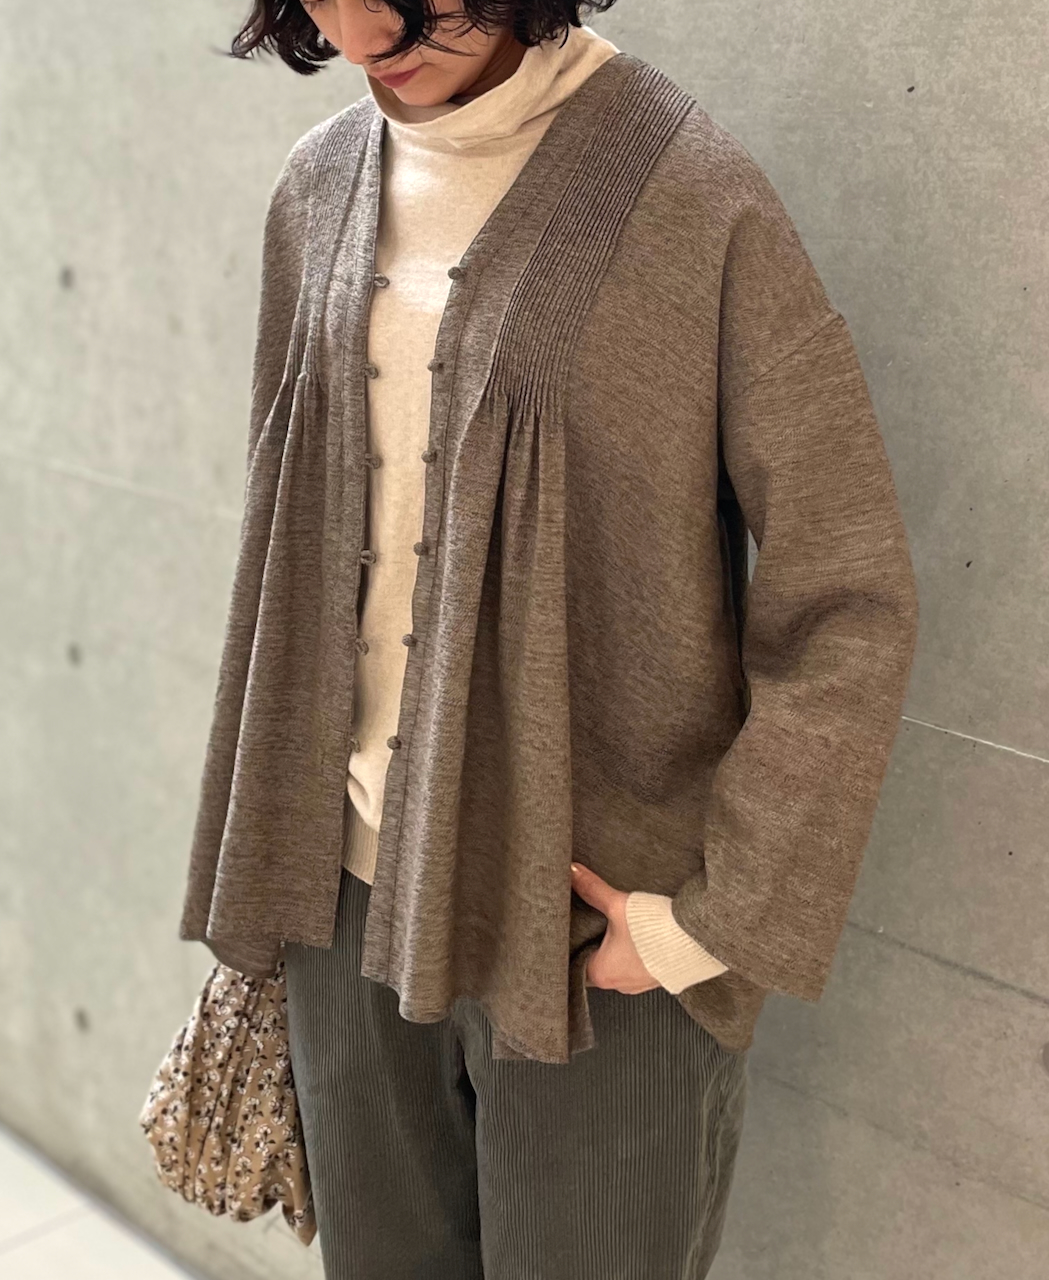 INMDS23752 (ブラウス) TWIST YARN WOOL V-NECK FRONT OPENING BLOUSE WITH MINI PINTUCK